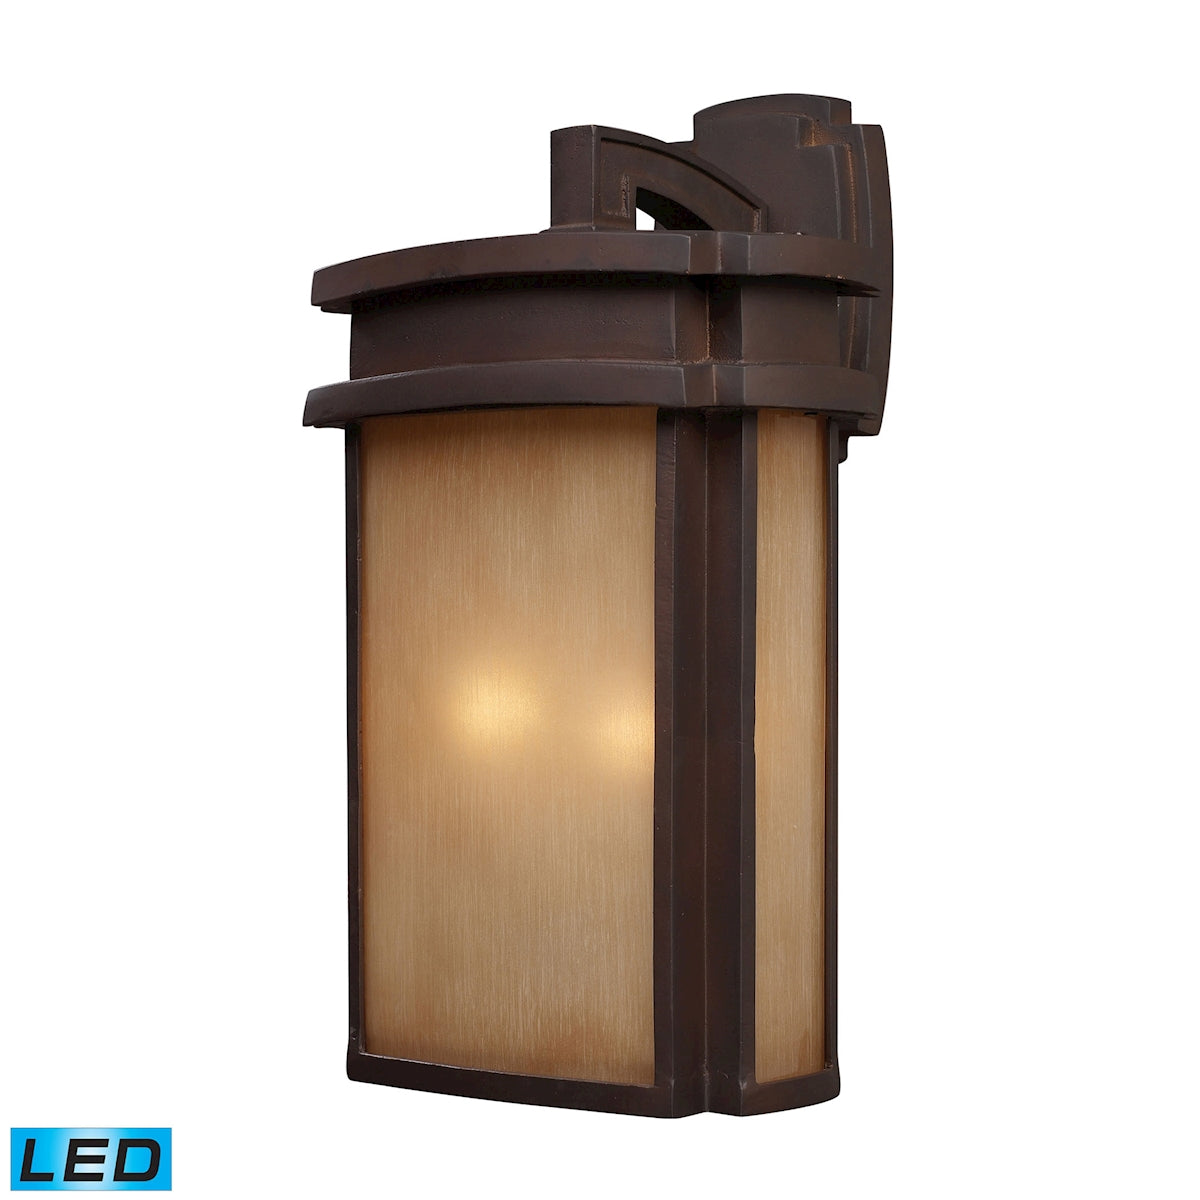 ELK Lighting 42142/2-LED Sedona 2-Light Outdoor Wall Lamp in Clay Bronze - Includes LED Bulbs